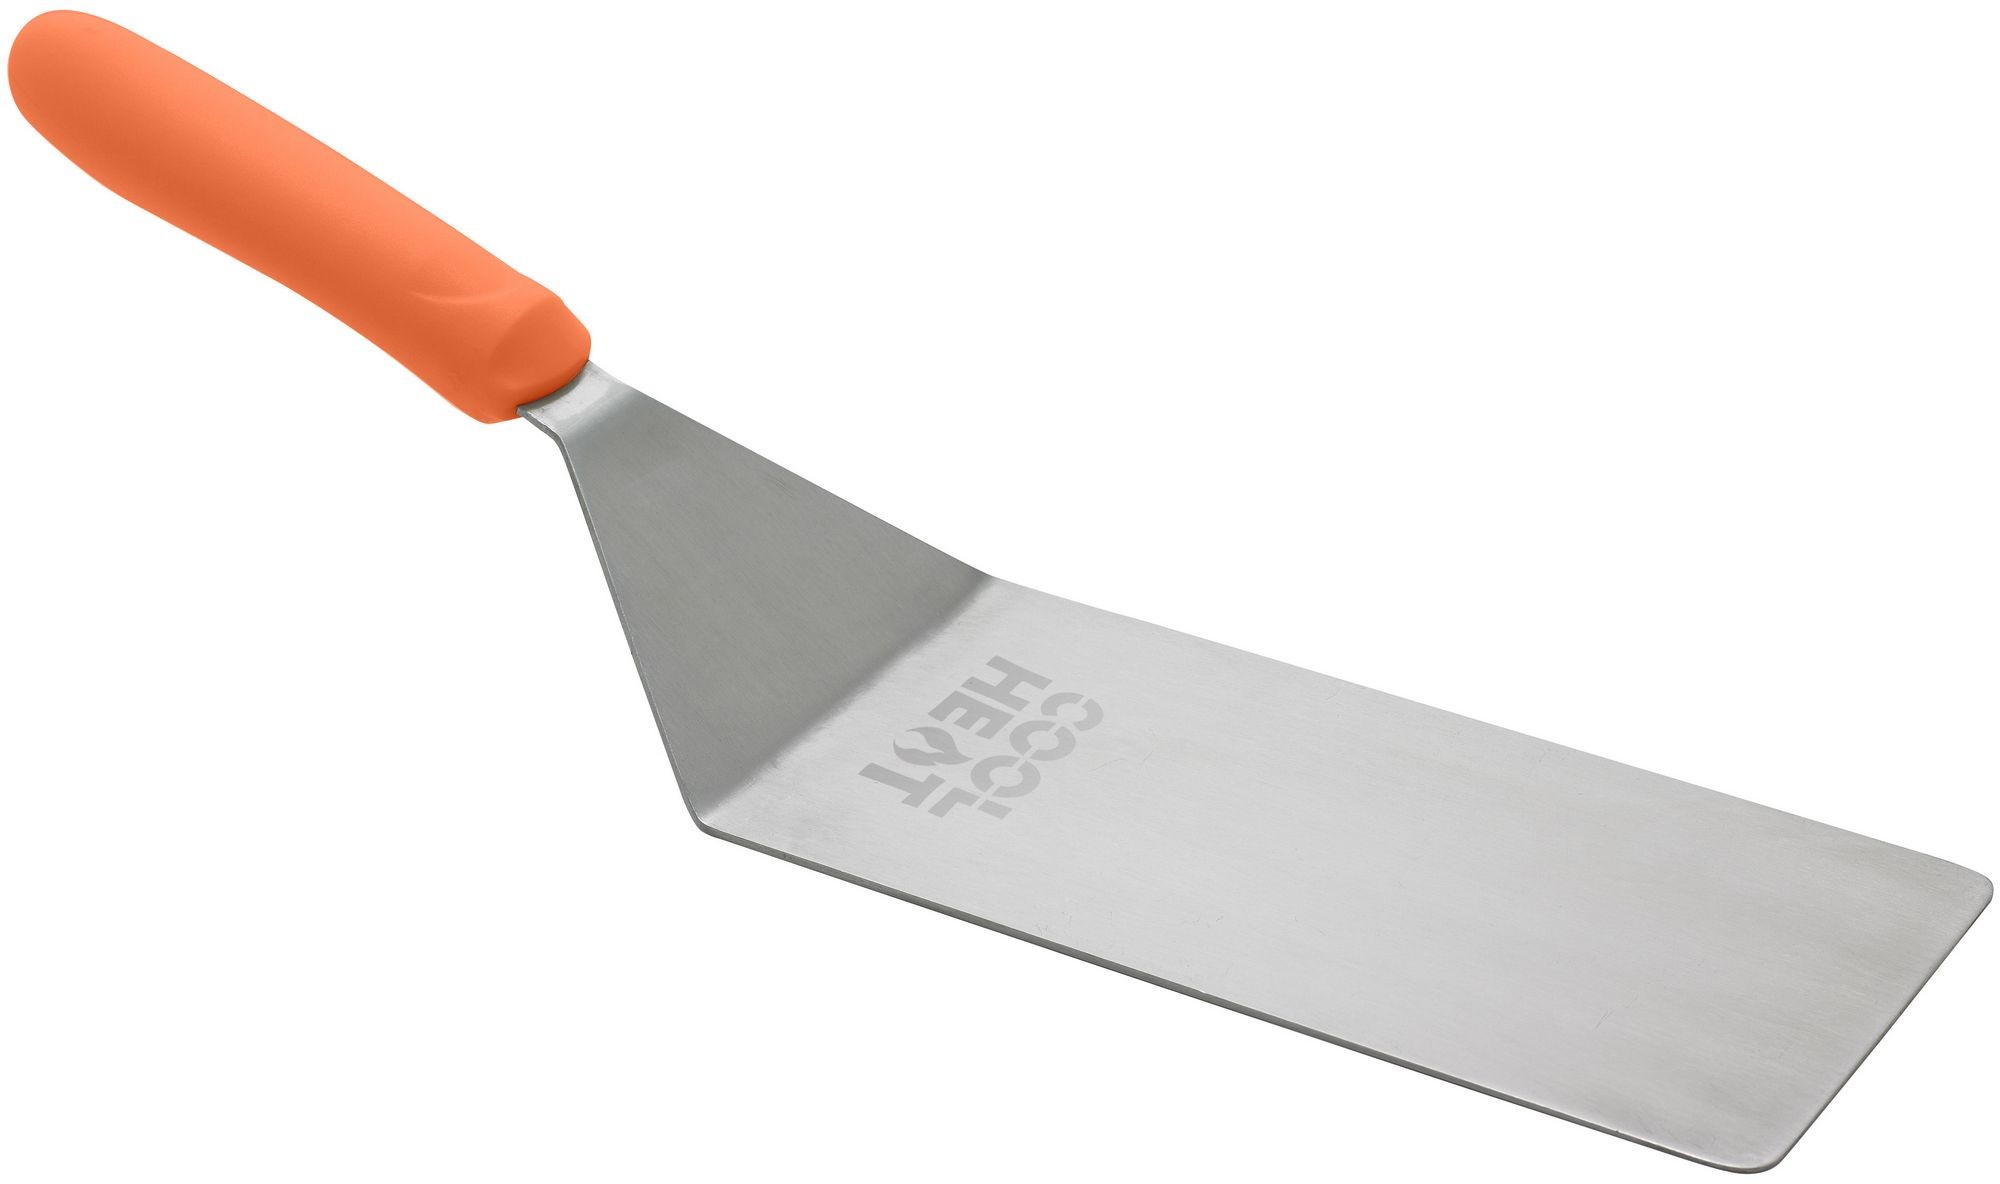 Winco TNH-42 Stainless Steel Offset Turner with Orange Nylon Handle, 8" x 4" Blade